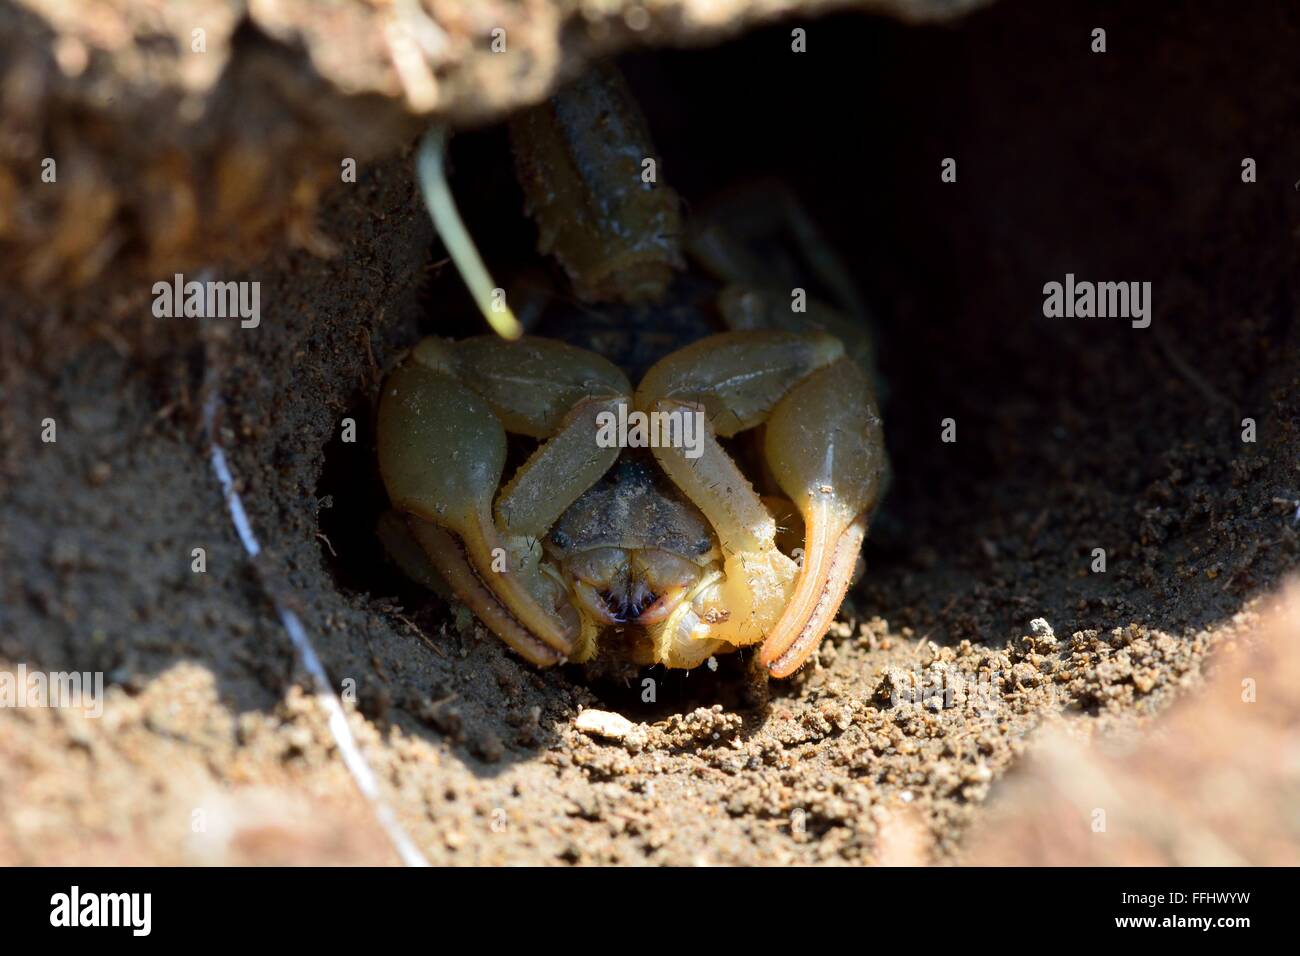 Common yellow scorpion (Buthus occitanus) in burrow. A scorpion in the family Buthidae, hiding away from the sun in hills Stock Photo